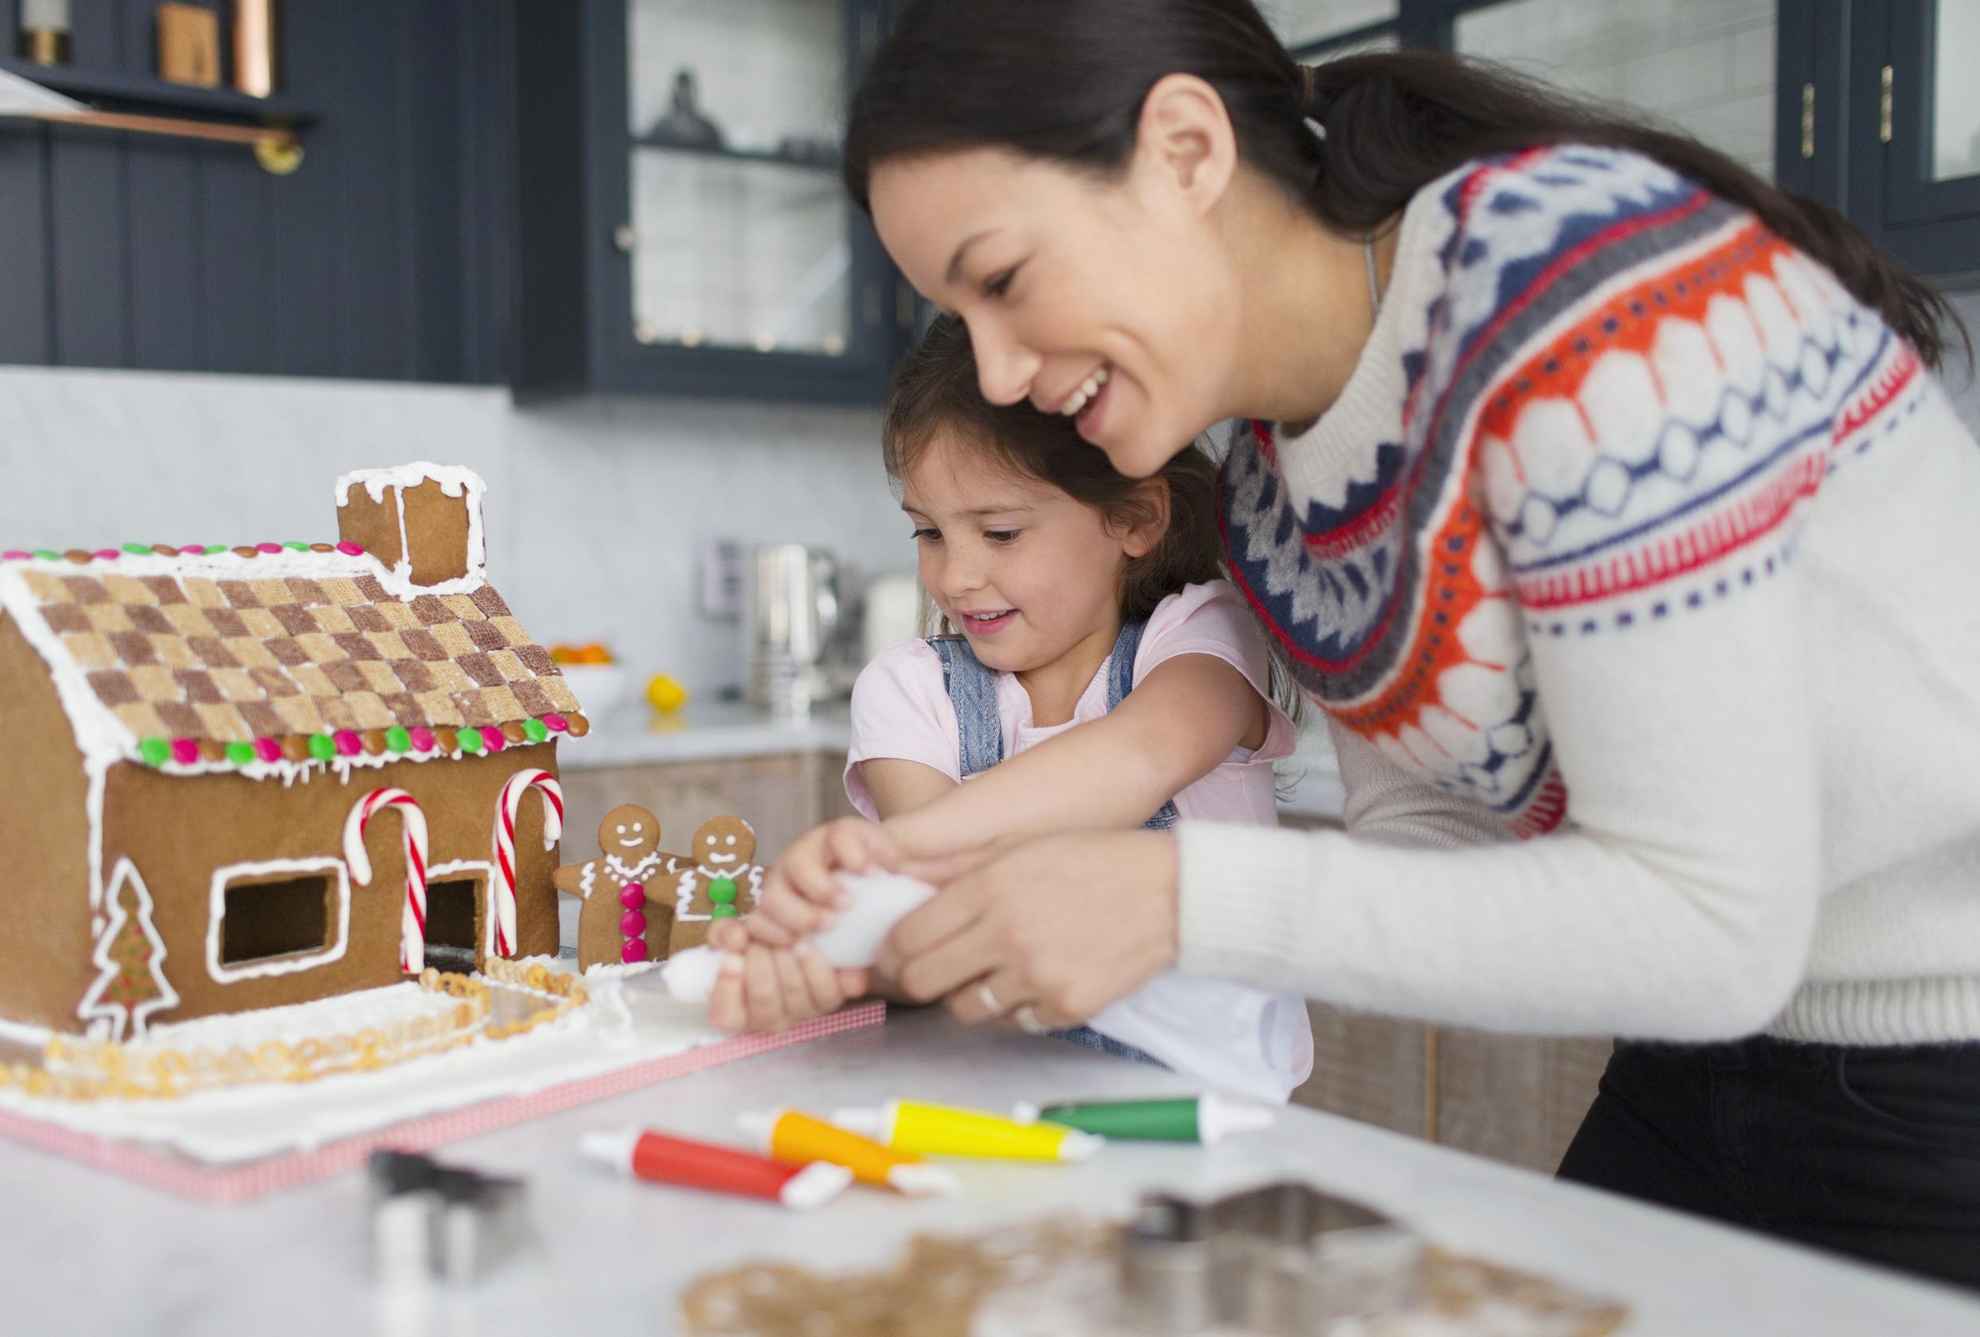 A woman and a child are making a gingerbread house.